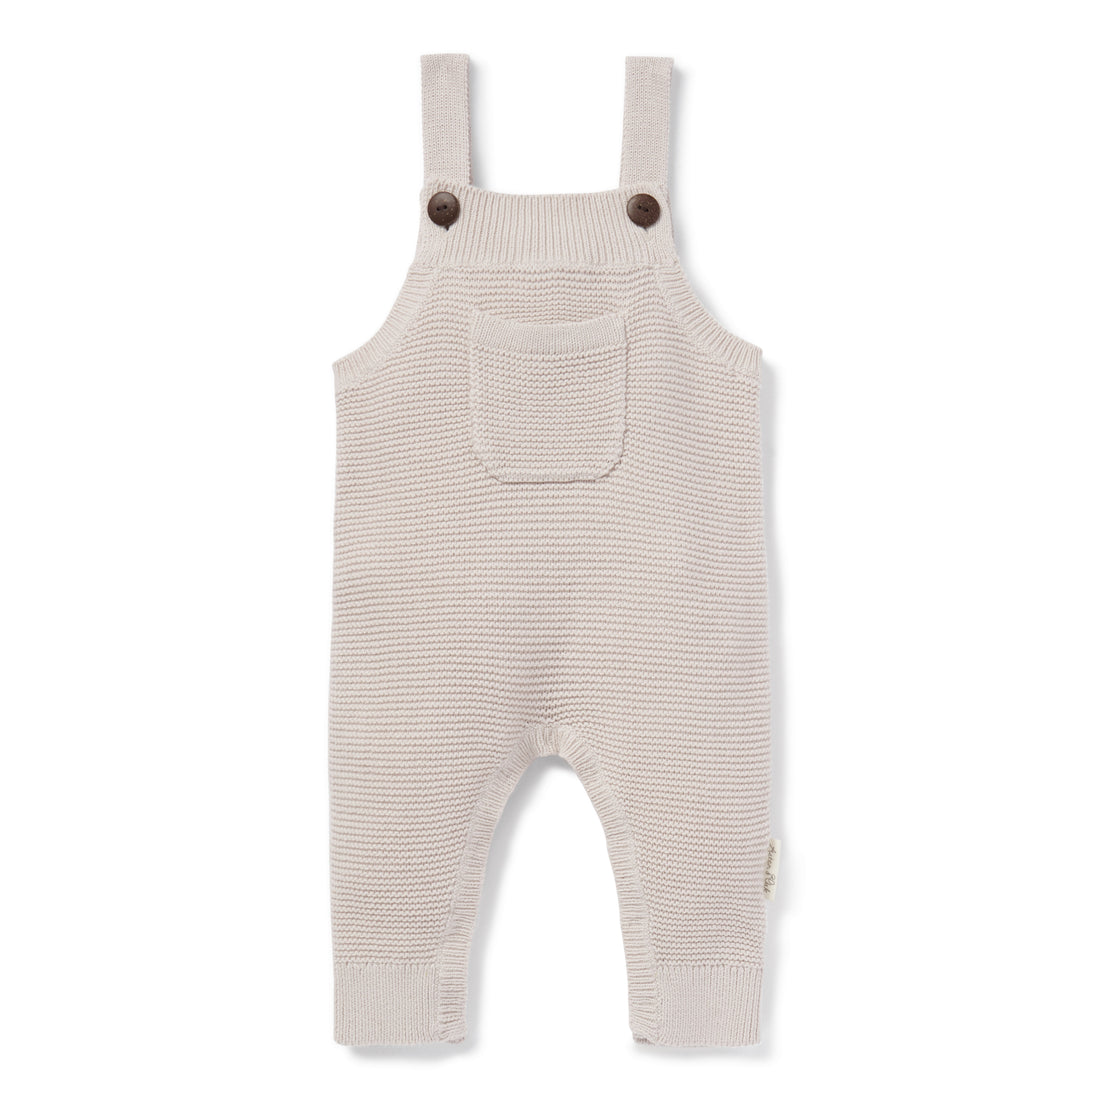 Baby & Newborn Oat Knit Pocket Overalls Knitted